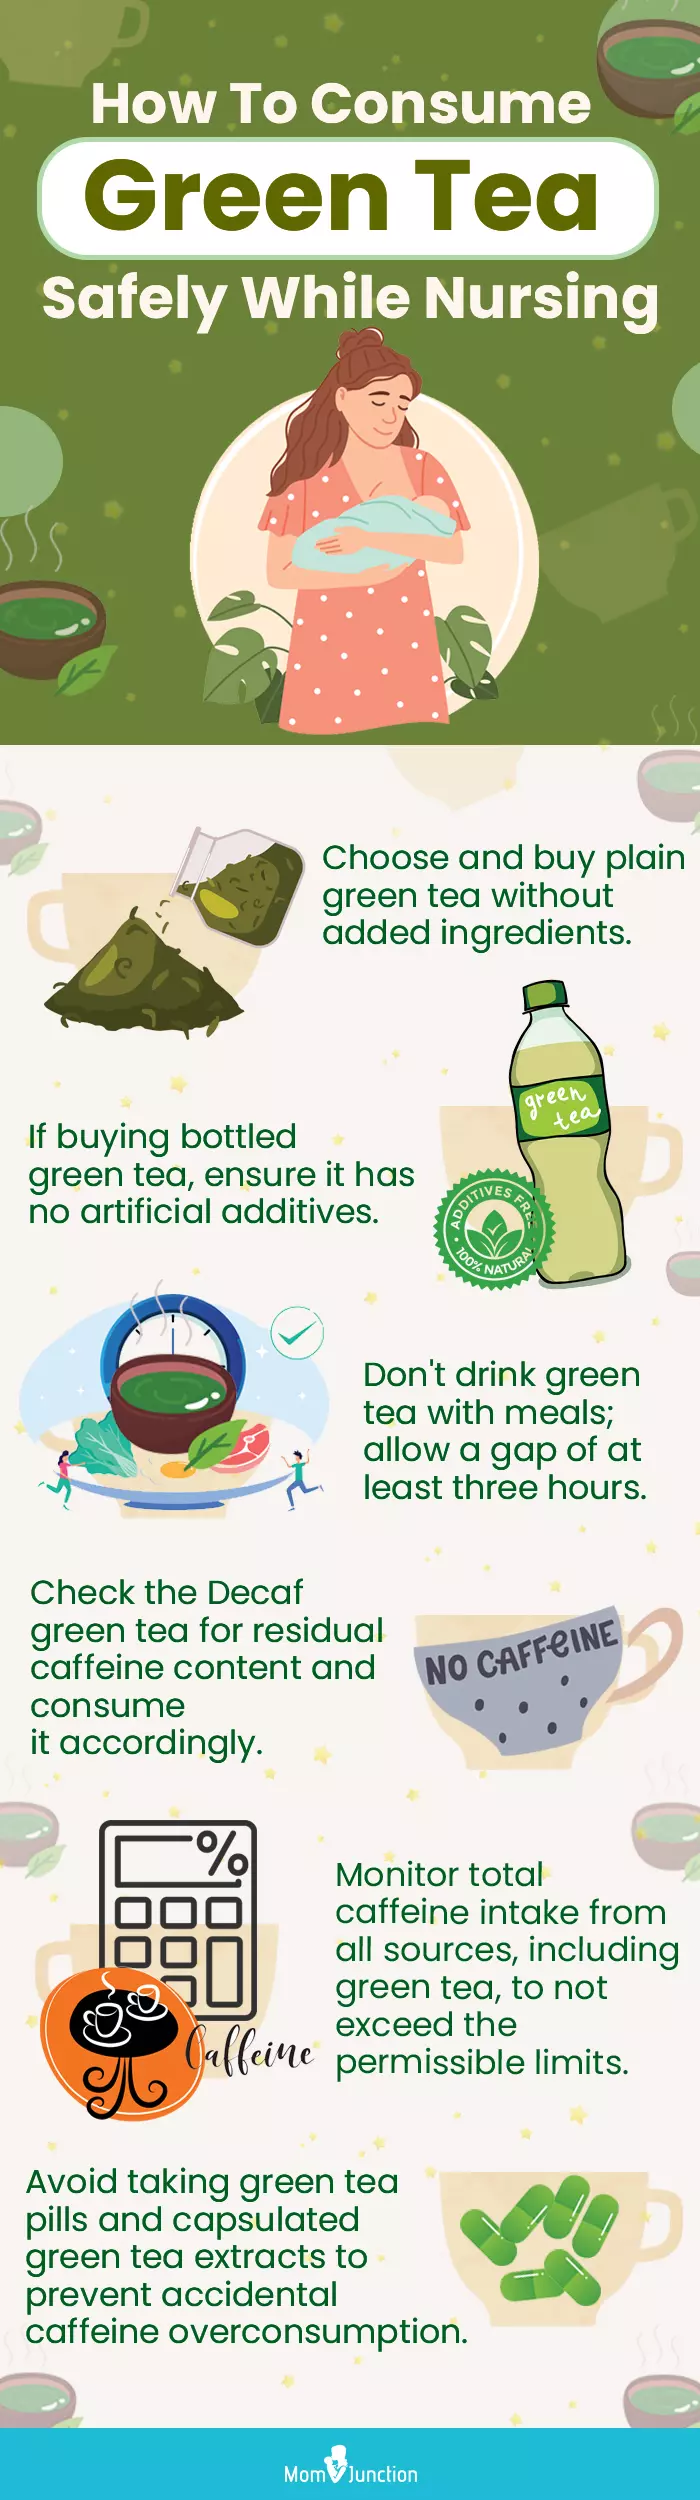 how to consume green tea safely while nursing (infographic)